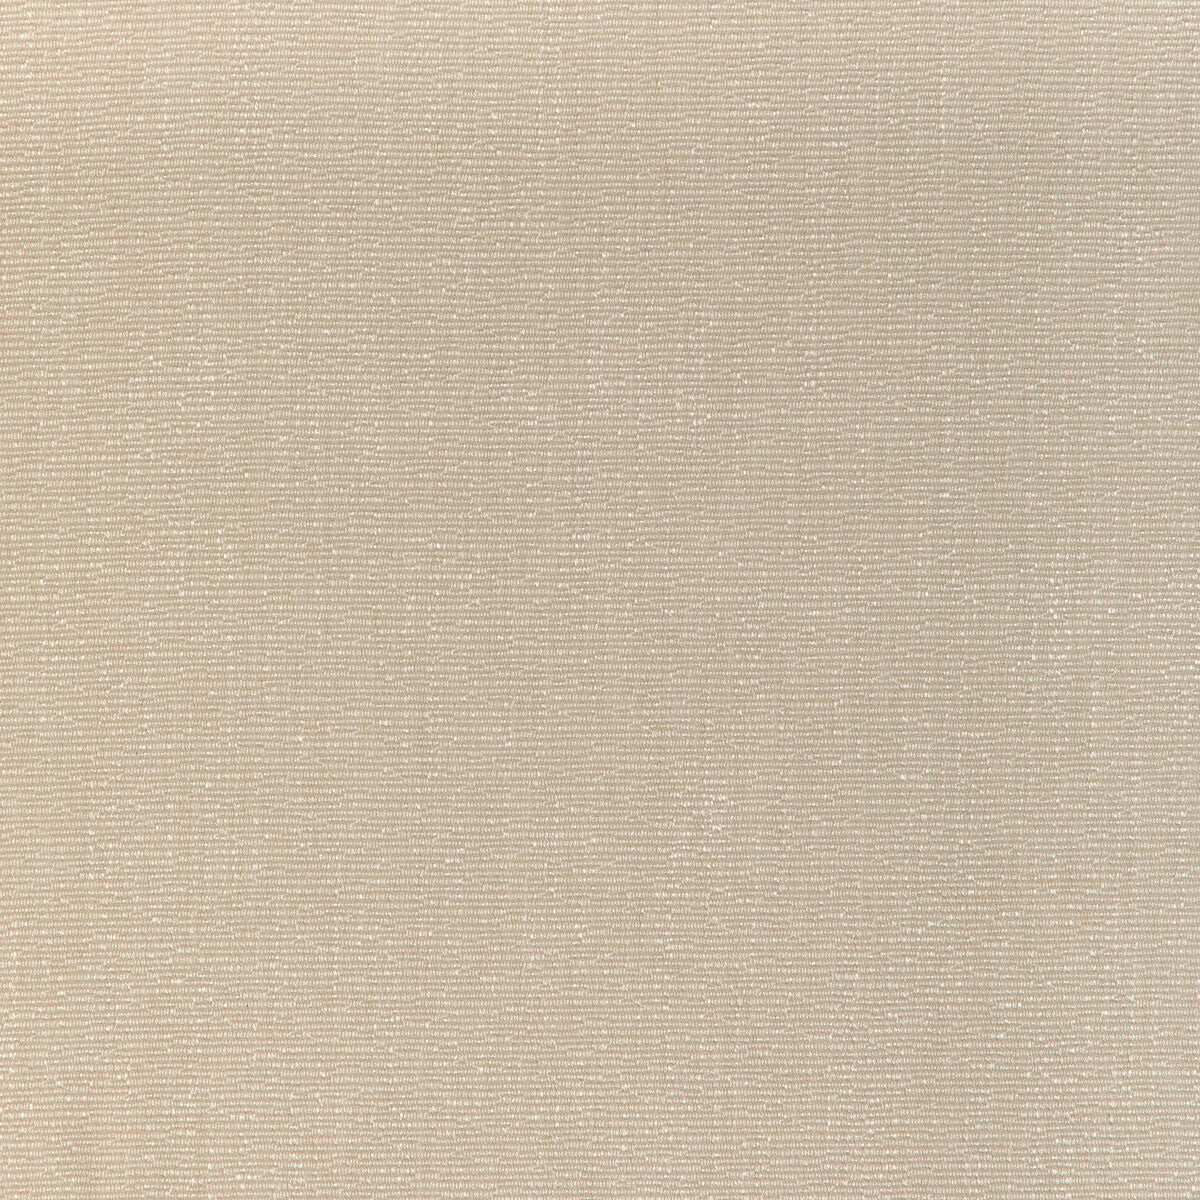 Carnot Plain fabric in ivory color - pattern 8023129.1.0 - by Brunschwig &amp; Fils in the Arles Weaves collection